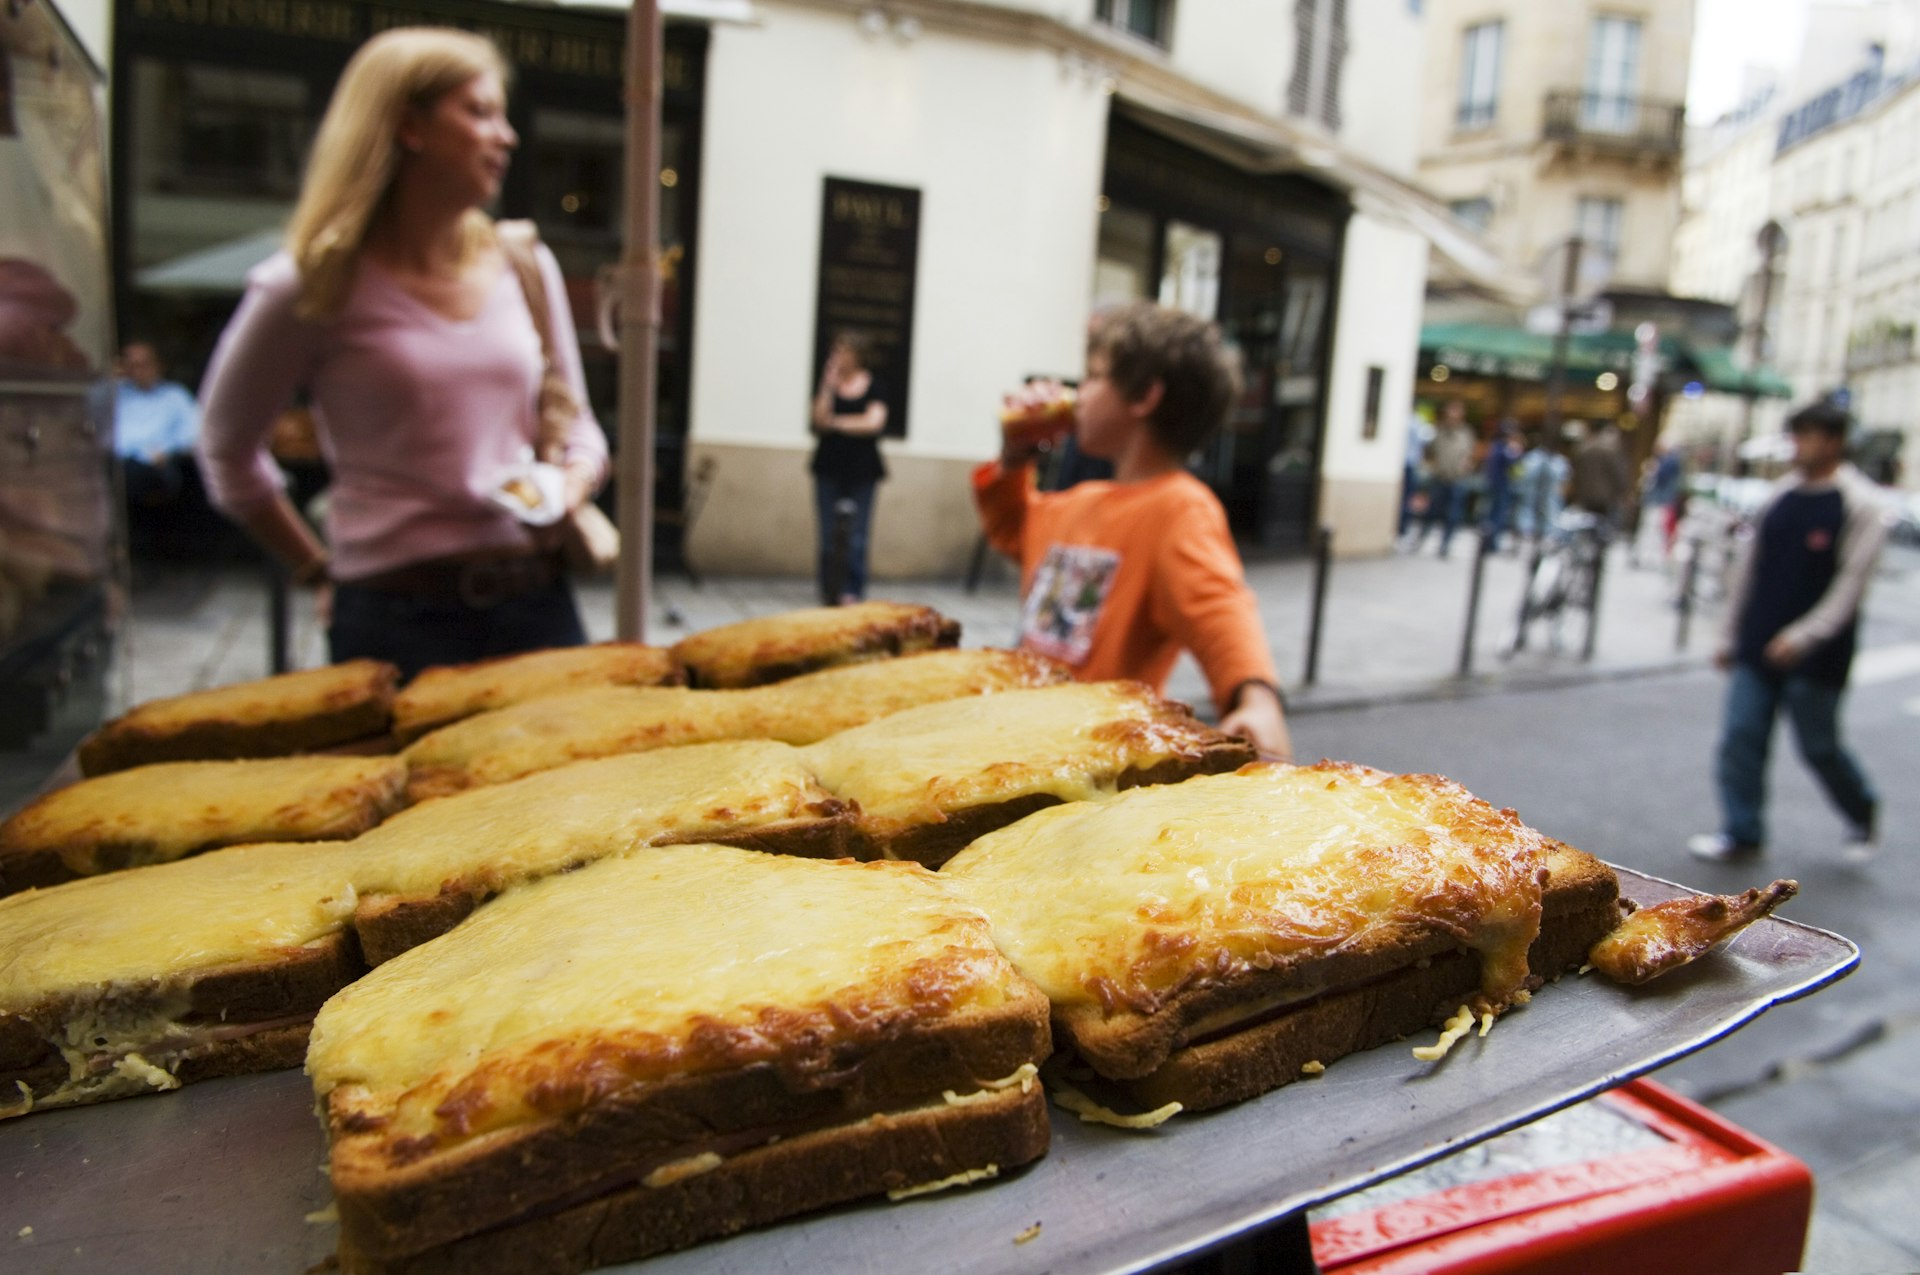 A display of croques (toasted cheese sandwiches) on sale on the street in Place St-Germain des Pres area with people in soft focus in the background.